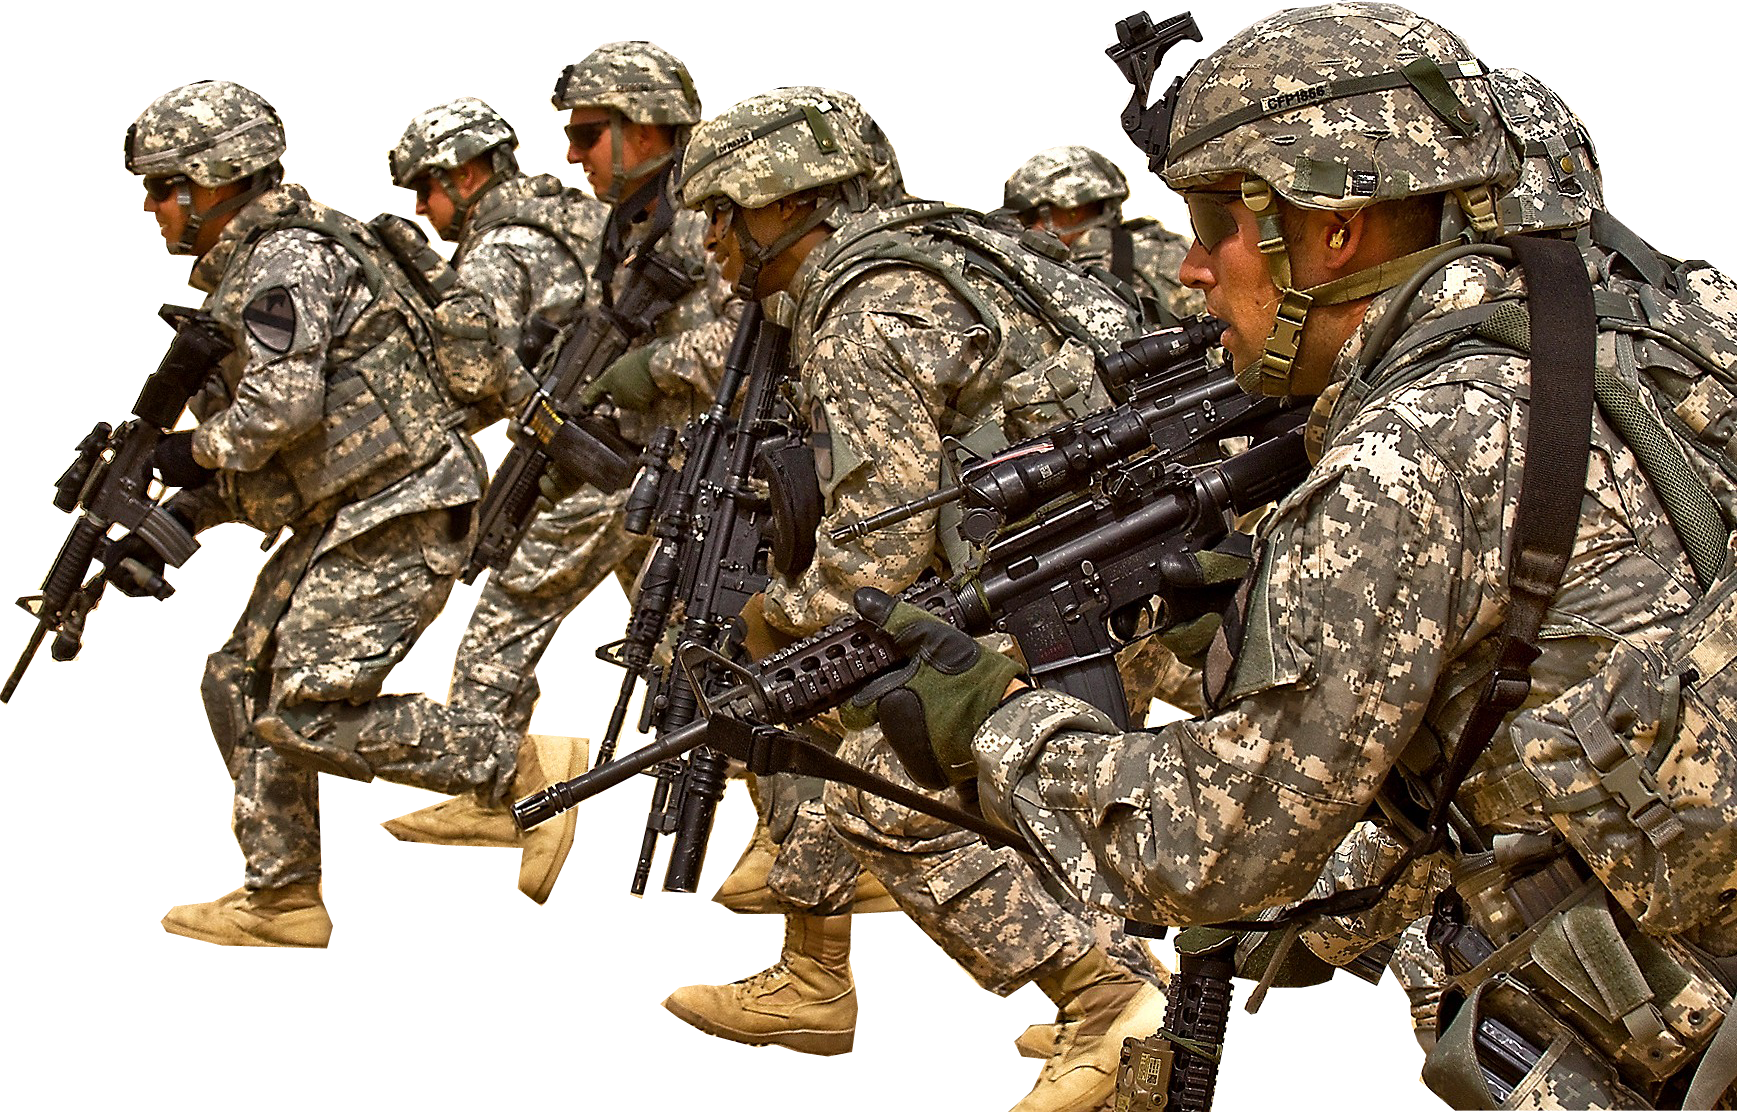 Soldiers PNG images 